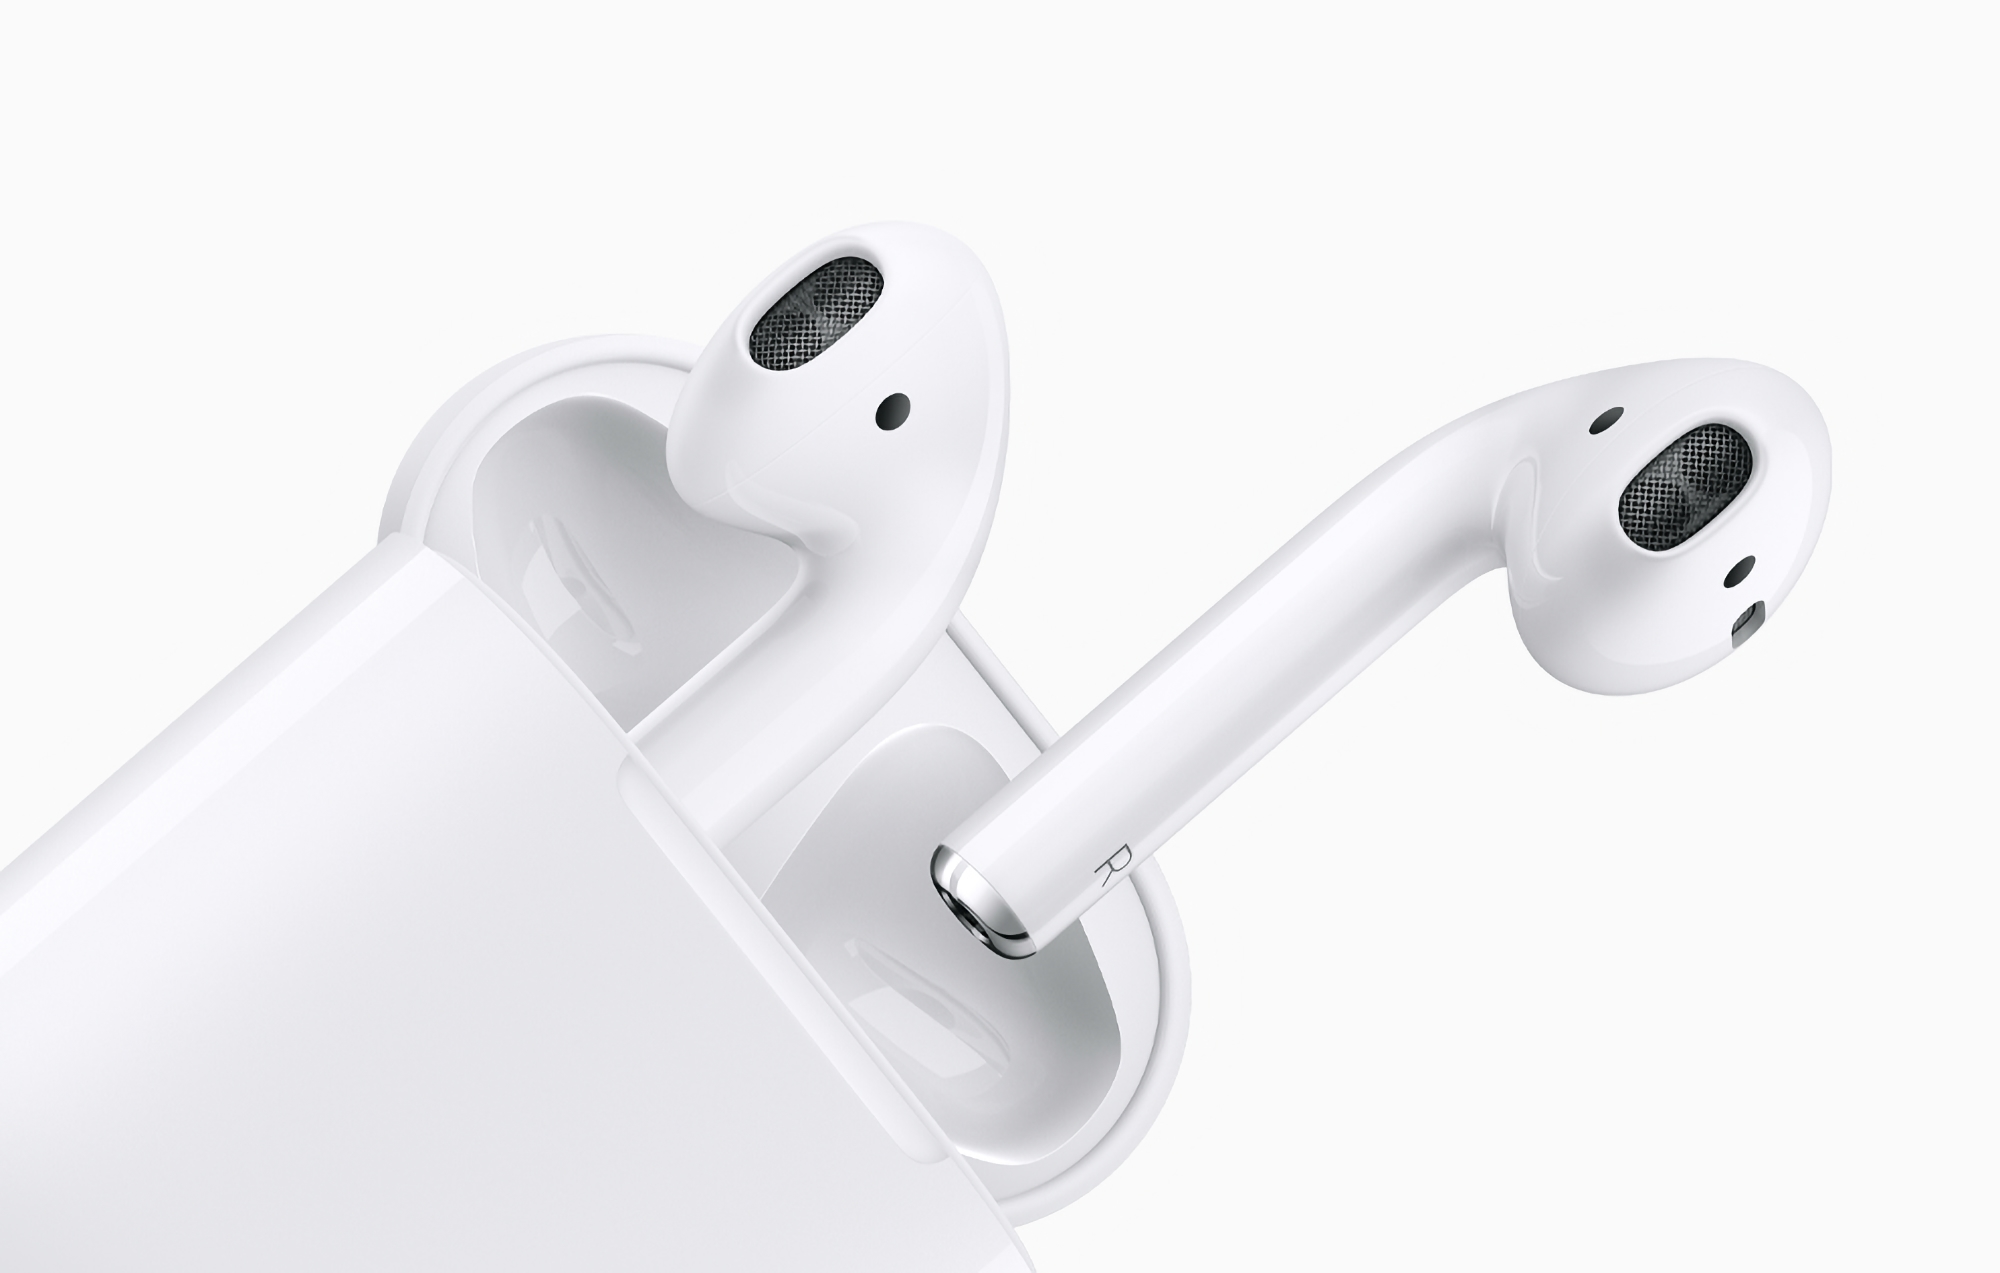 Rumor: Apple is working on AirPods Lite, they will compete with the budget TWS earbuds on the market